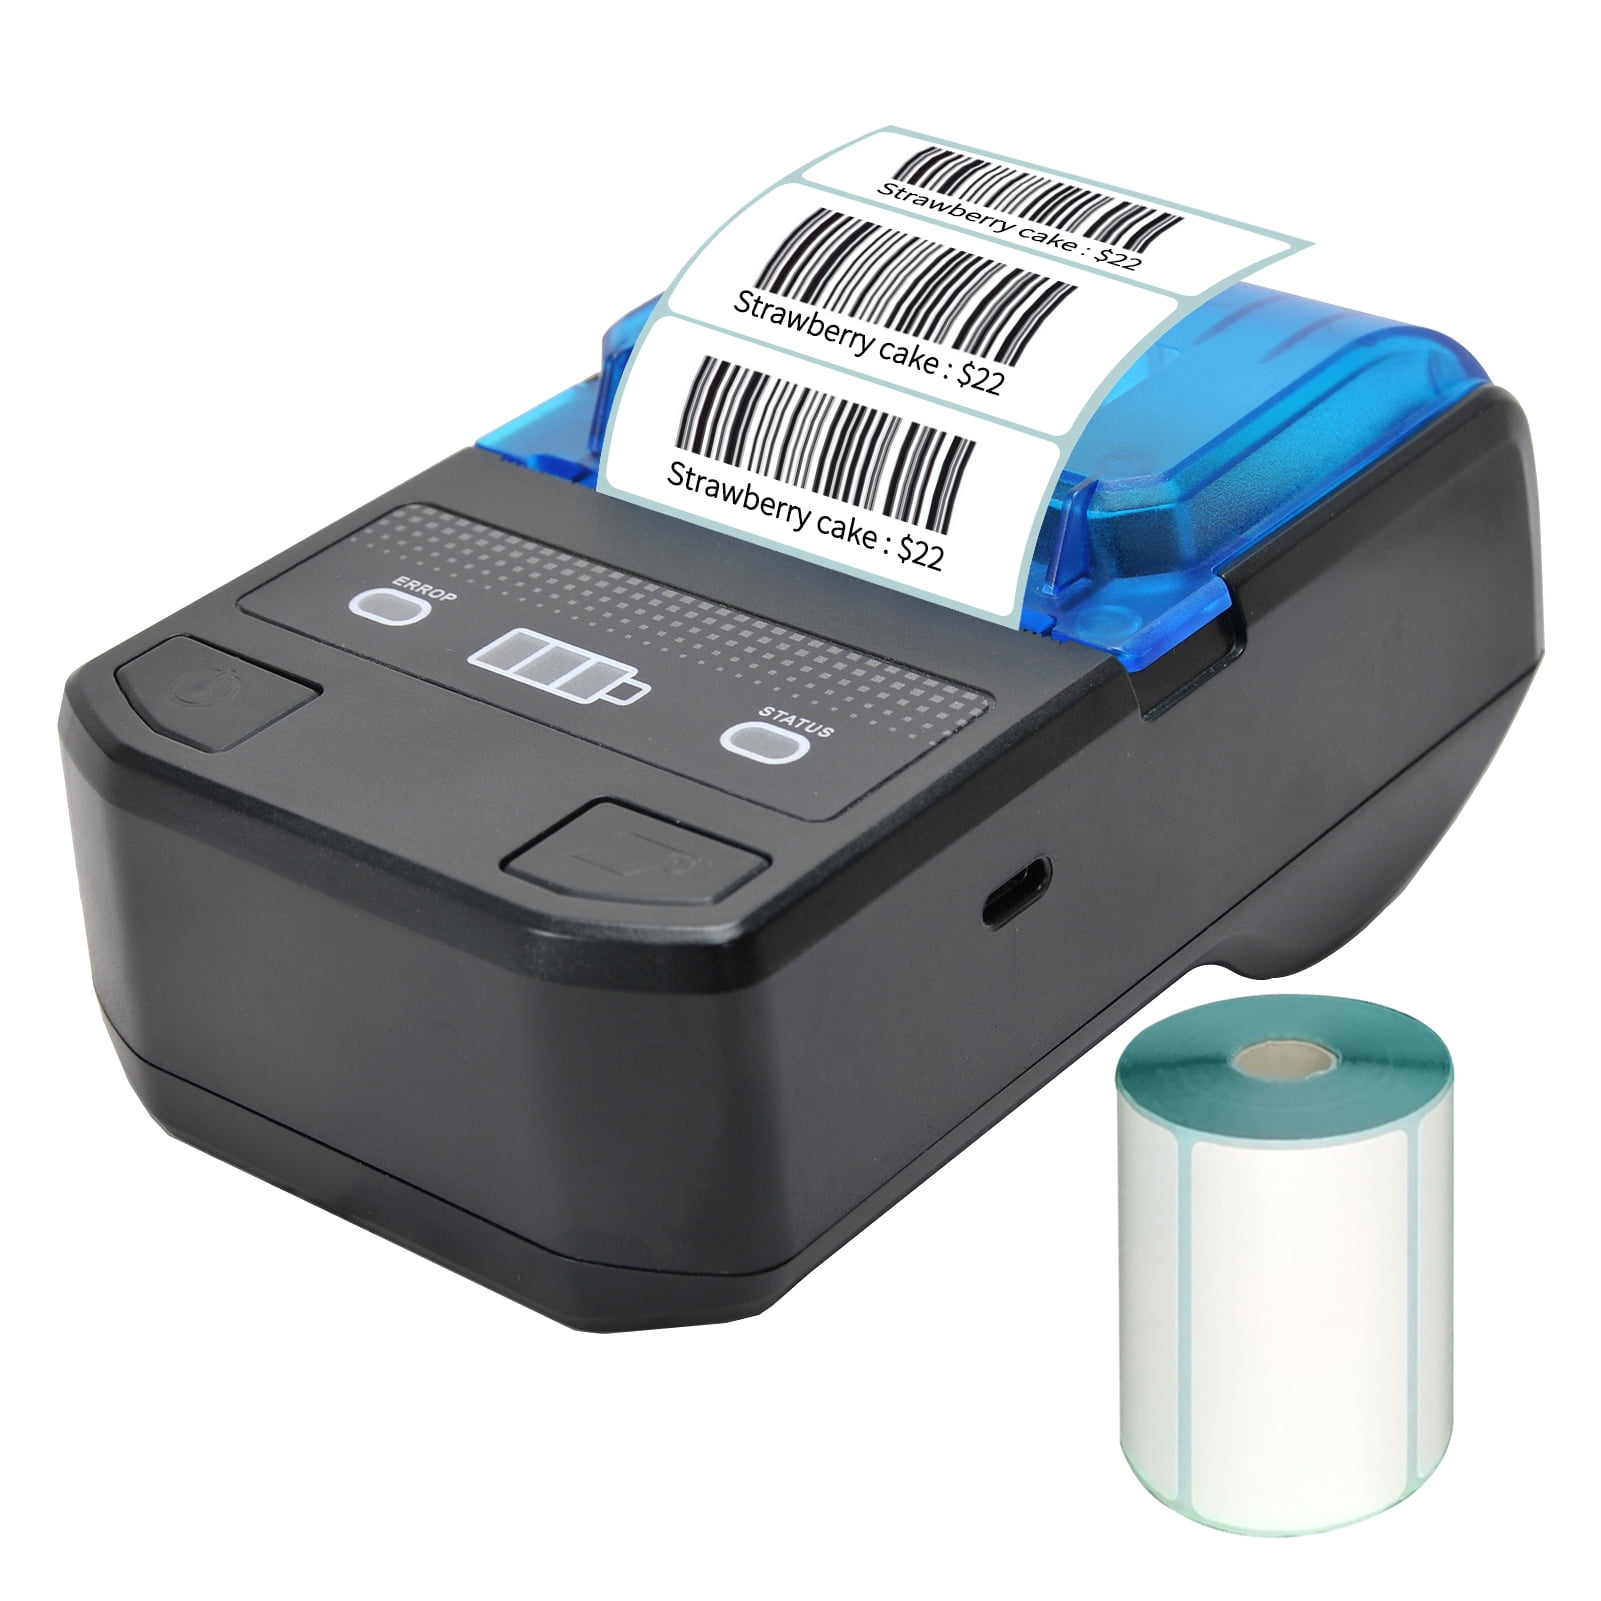 Wireless Mini Portable Thermal Printer Label Maker, Paper Included for  Android and iOS Phone, White